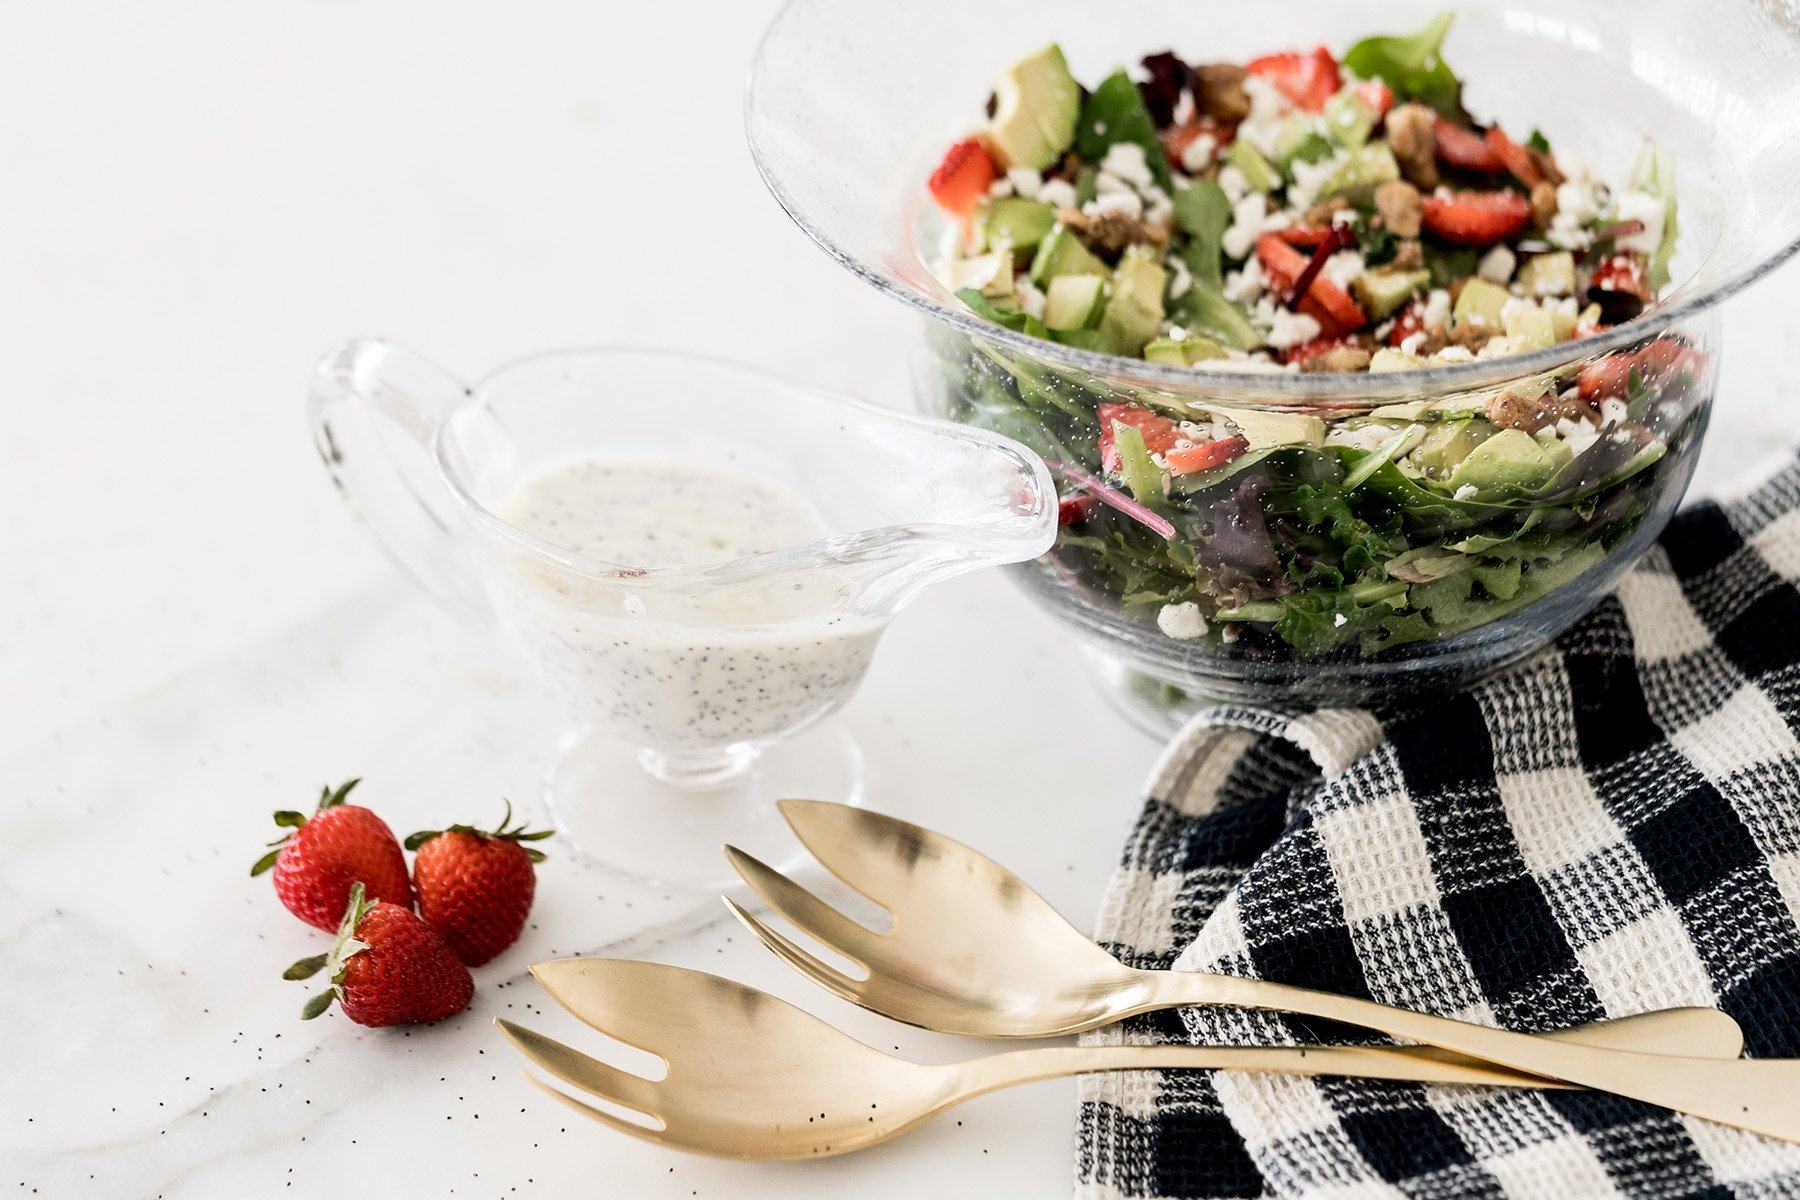 An Easy and Satisfying Strawberry Avocado Crunch Salad with the Best Dressing